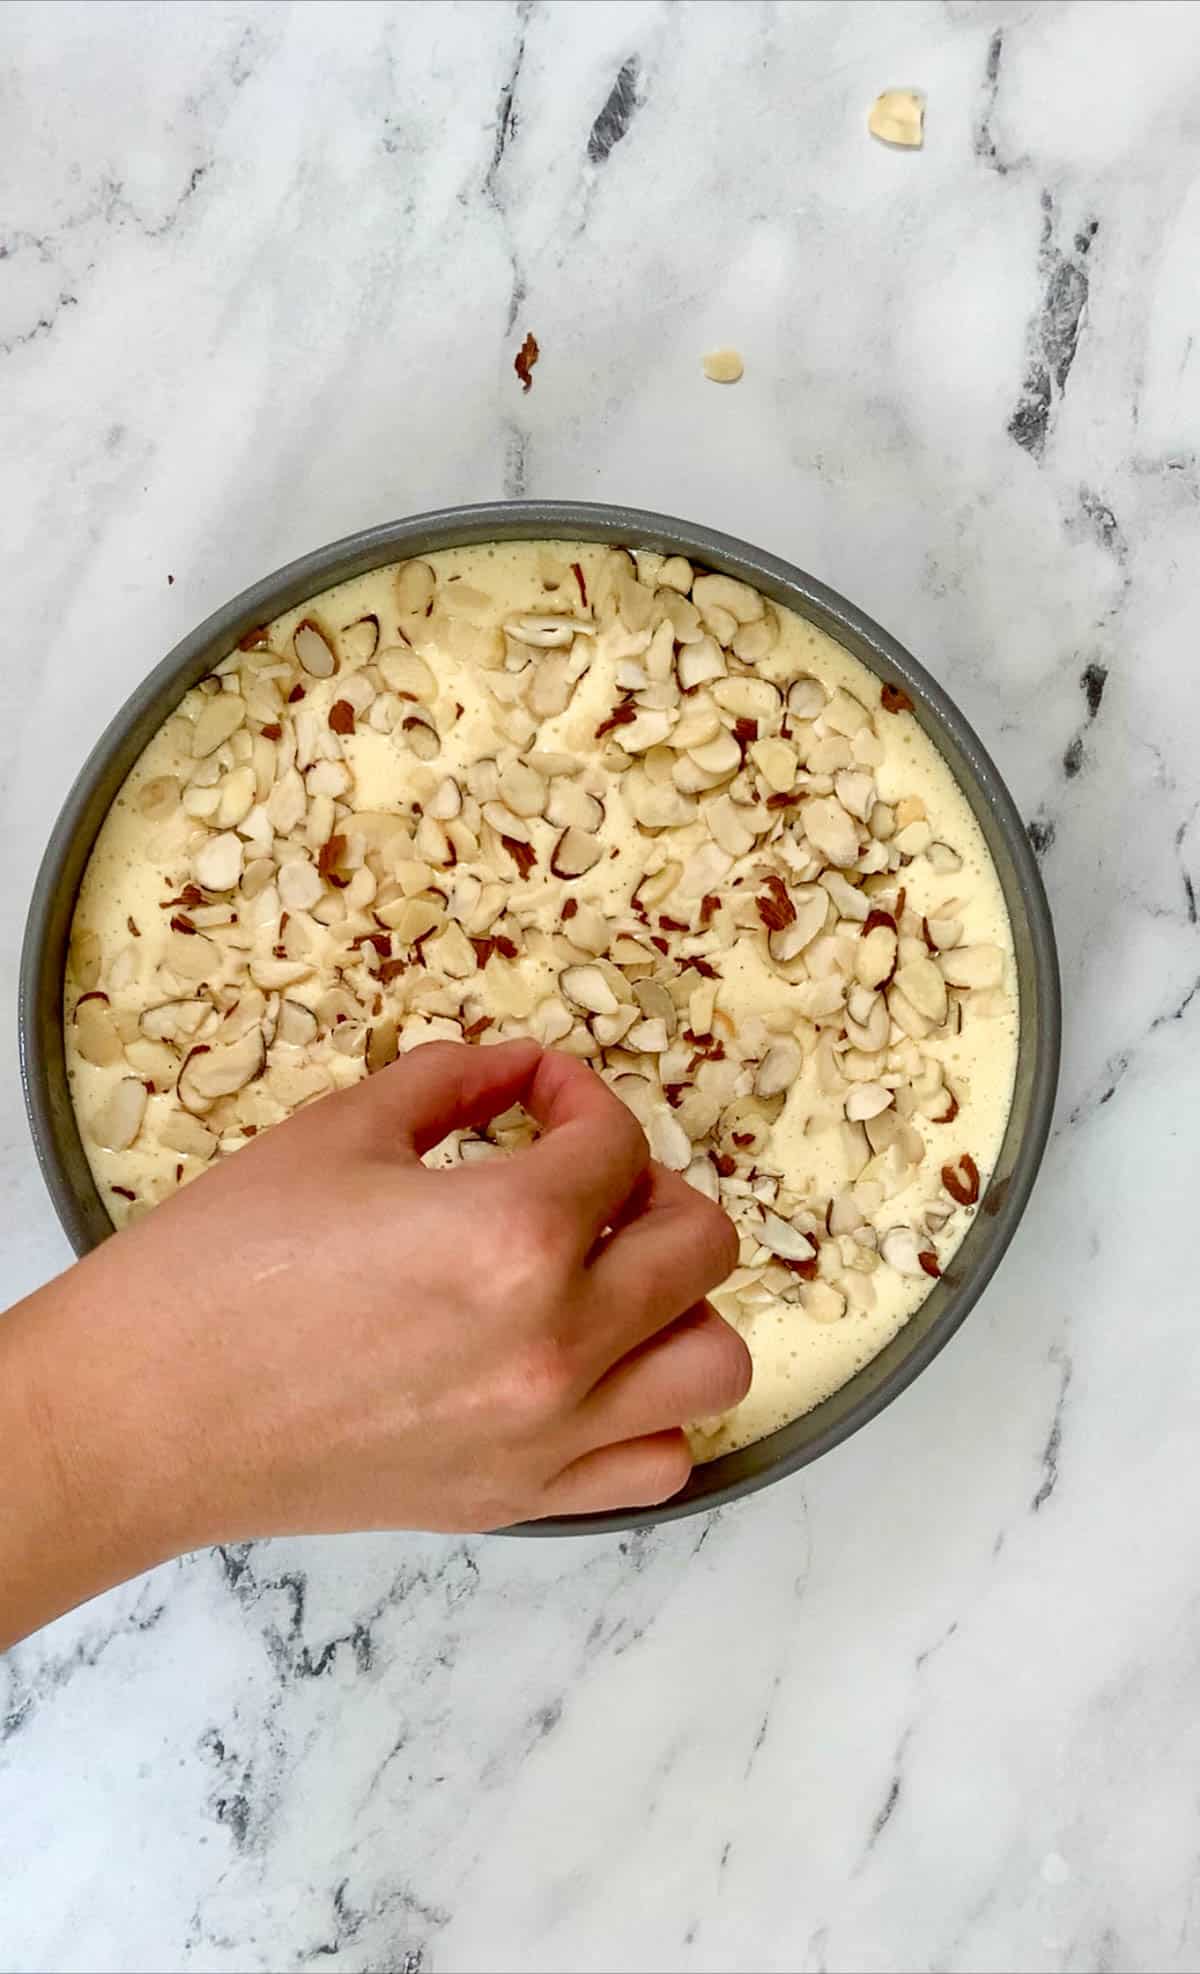 decorating the italian almond cake with slivered almonds before placing the cake in the oven.